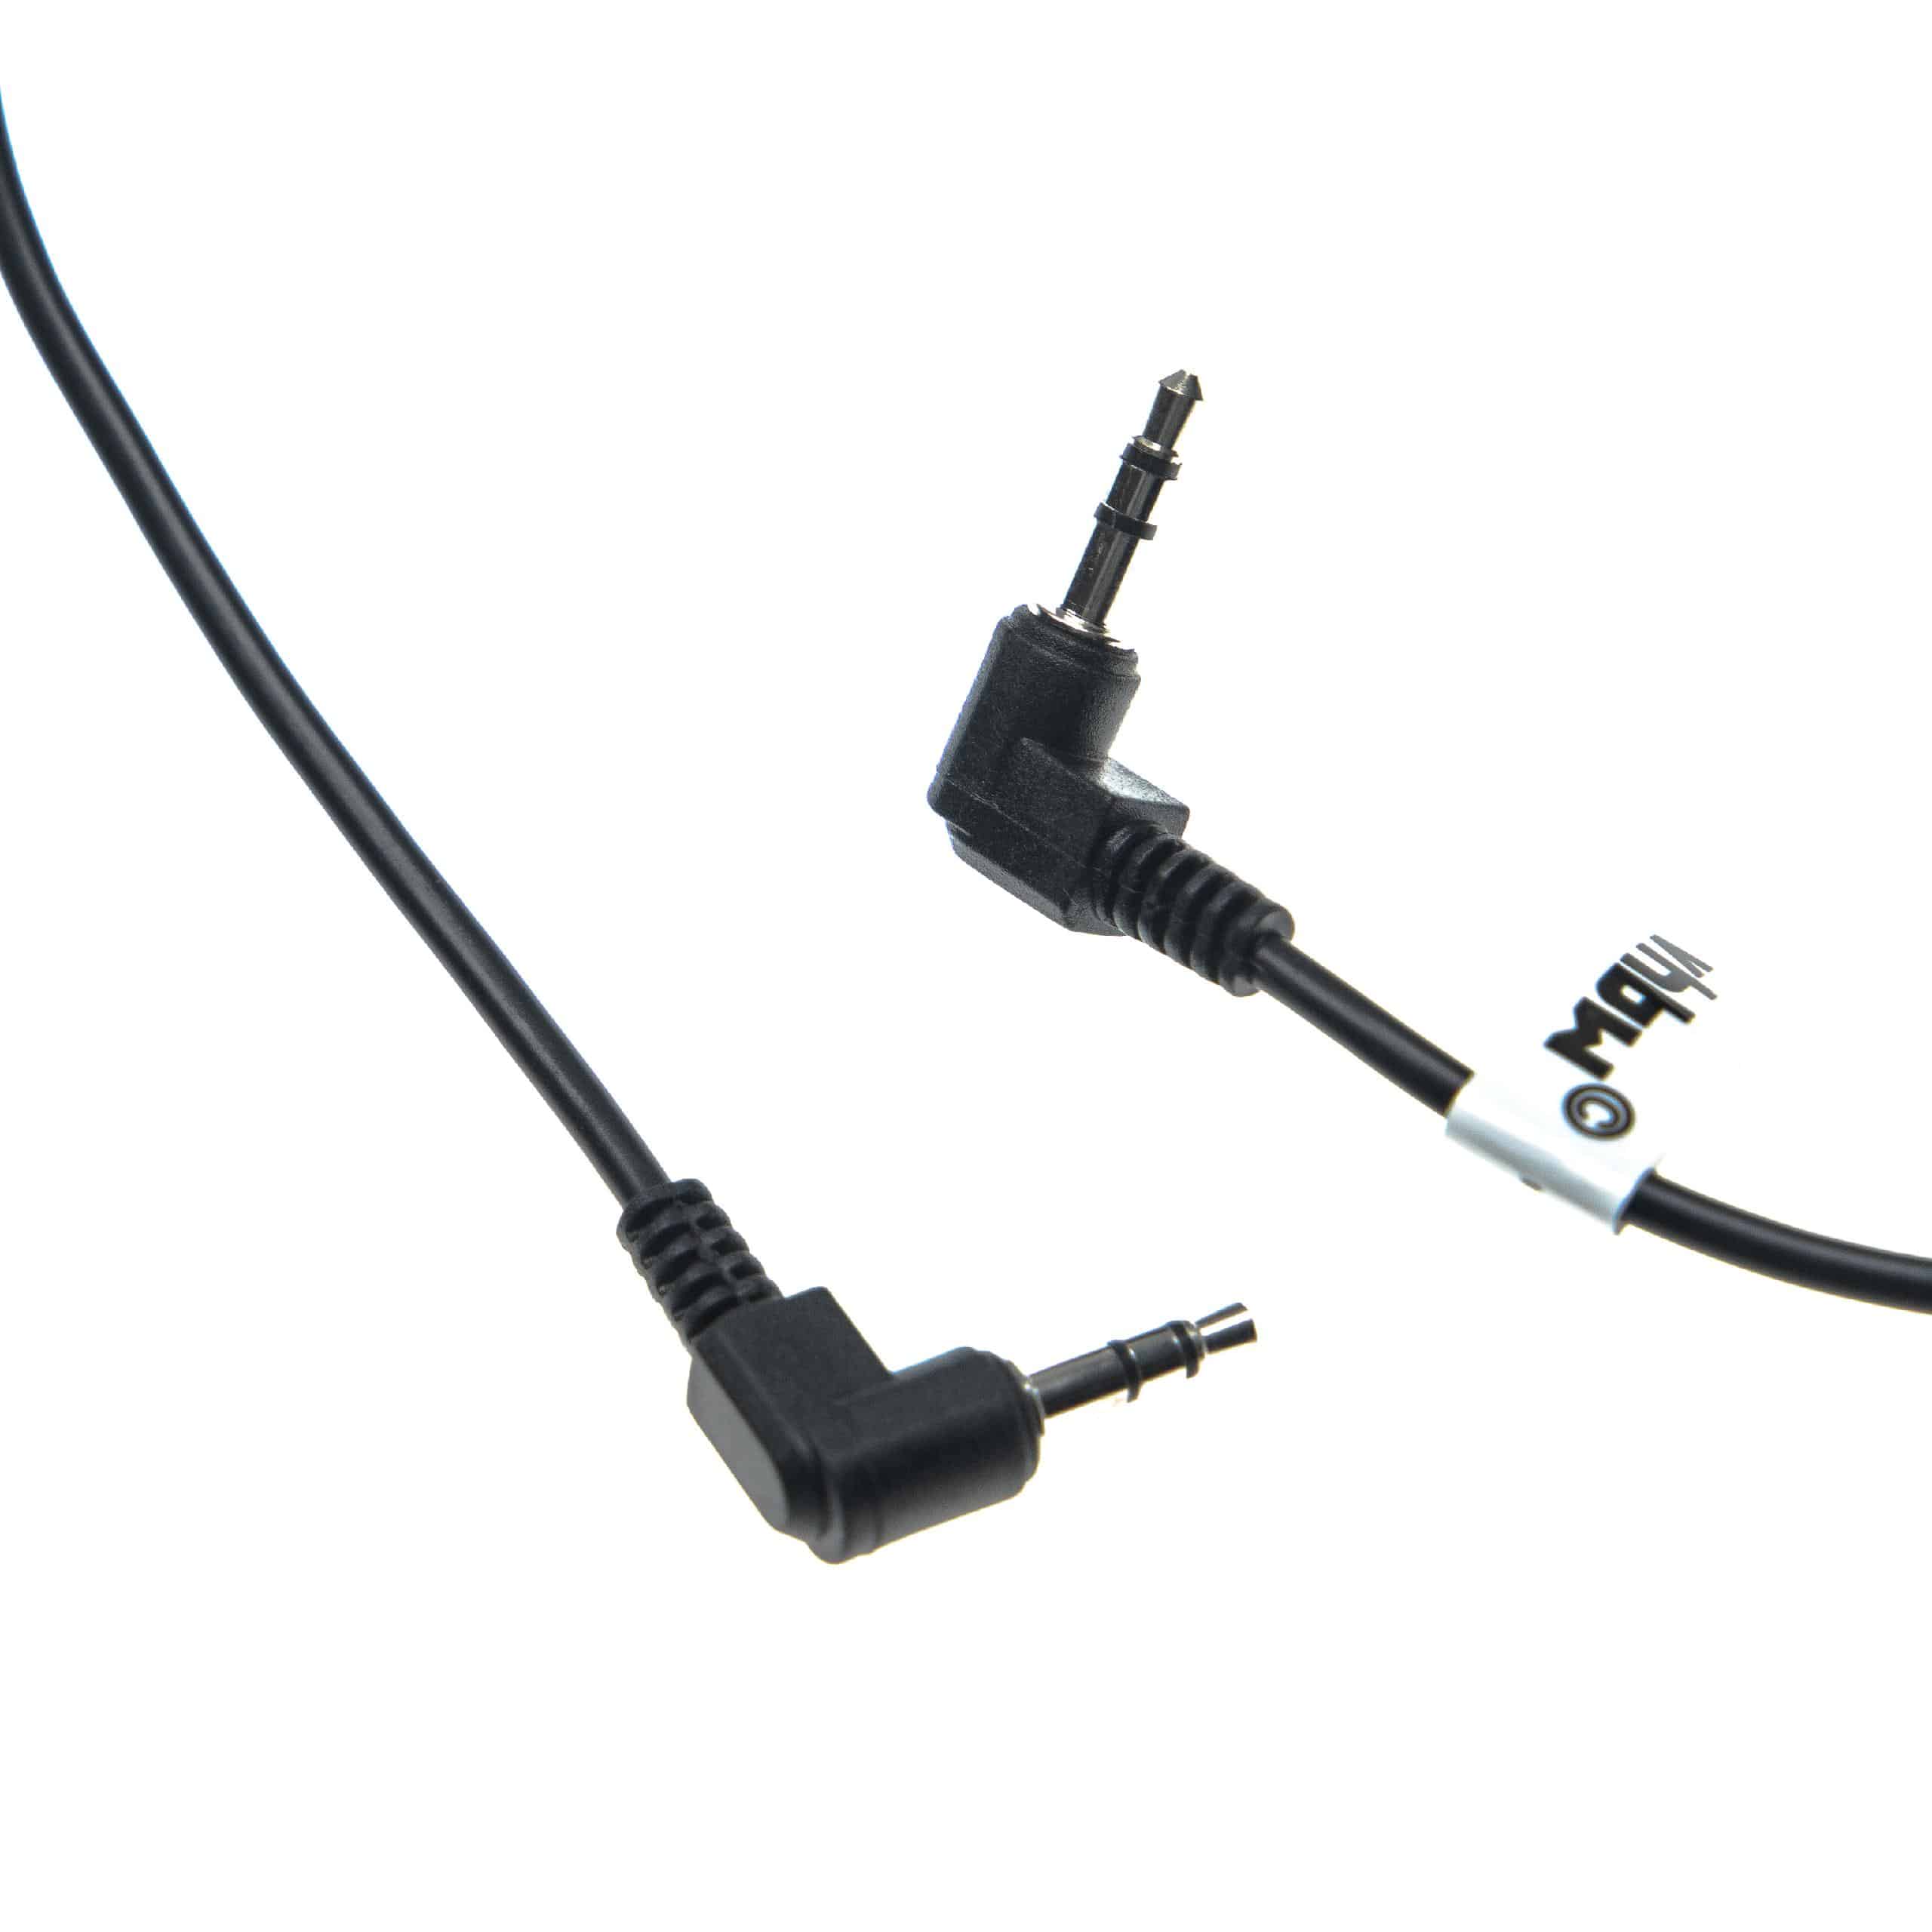 Cable for Shutter Release suitable for MZ6 Pentax, Samsung, Canon MZ6 Camera etc. - 140 cm